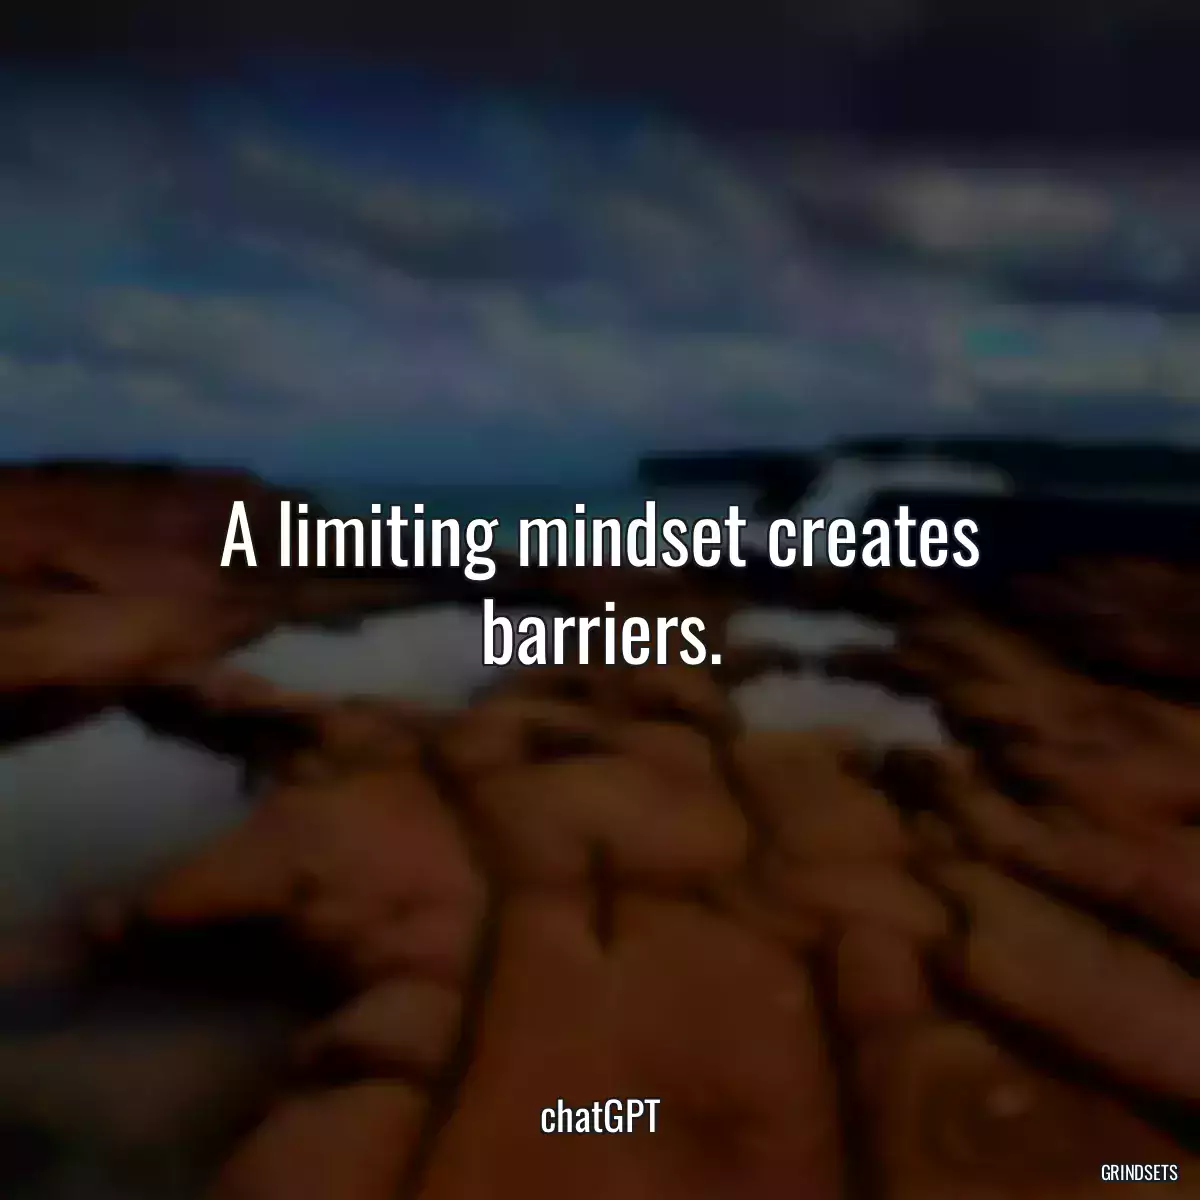 A limiting mindset creates barriers.